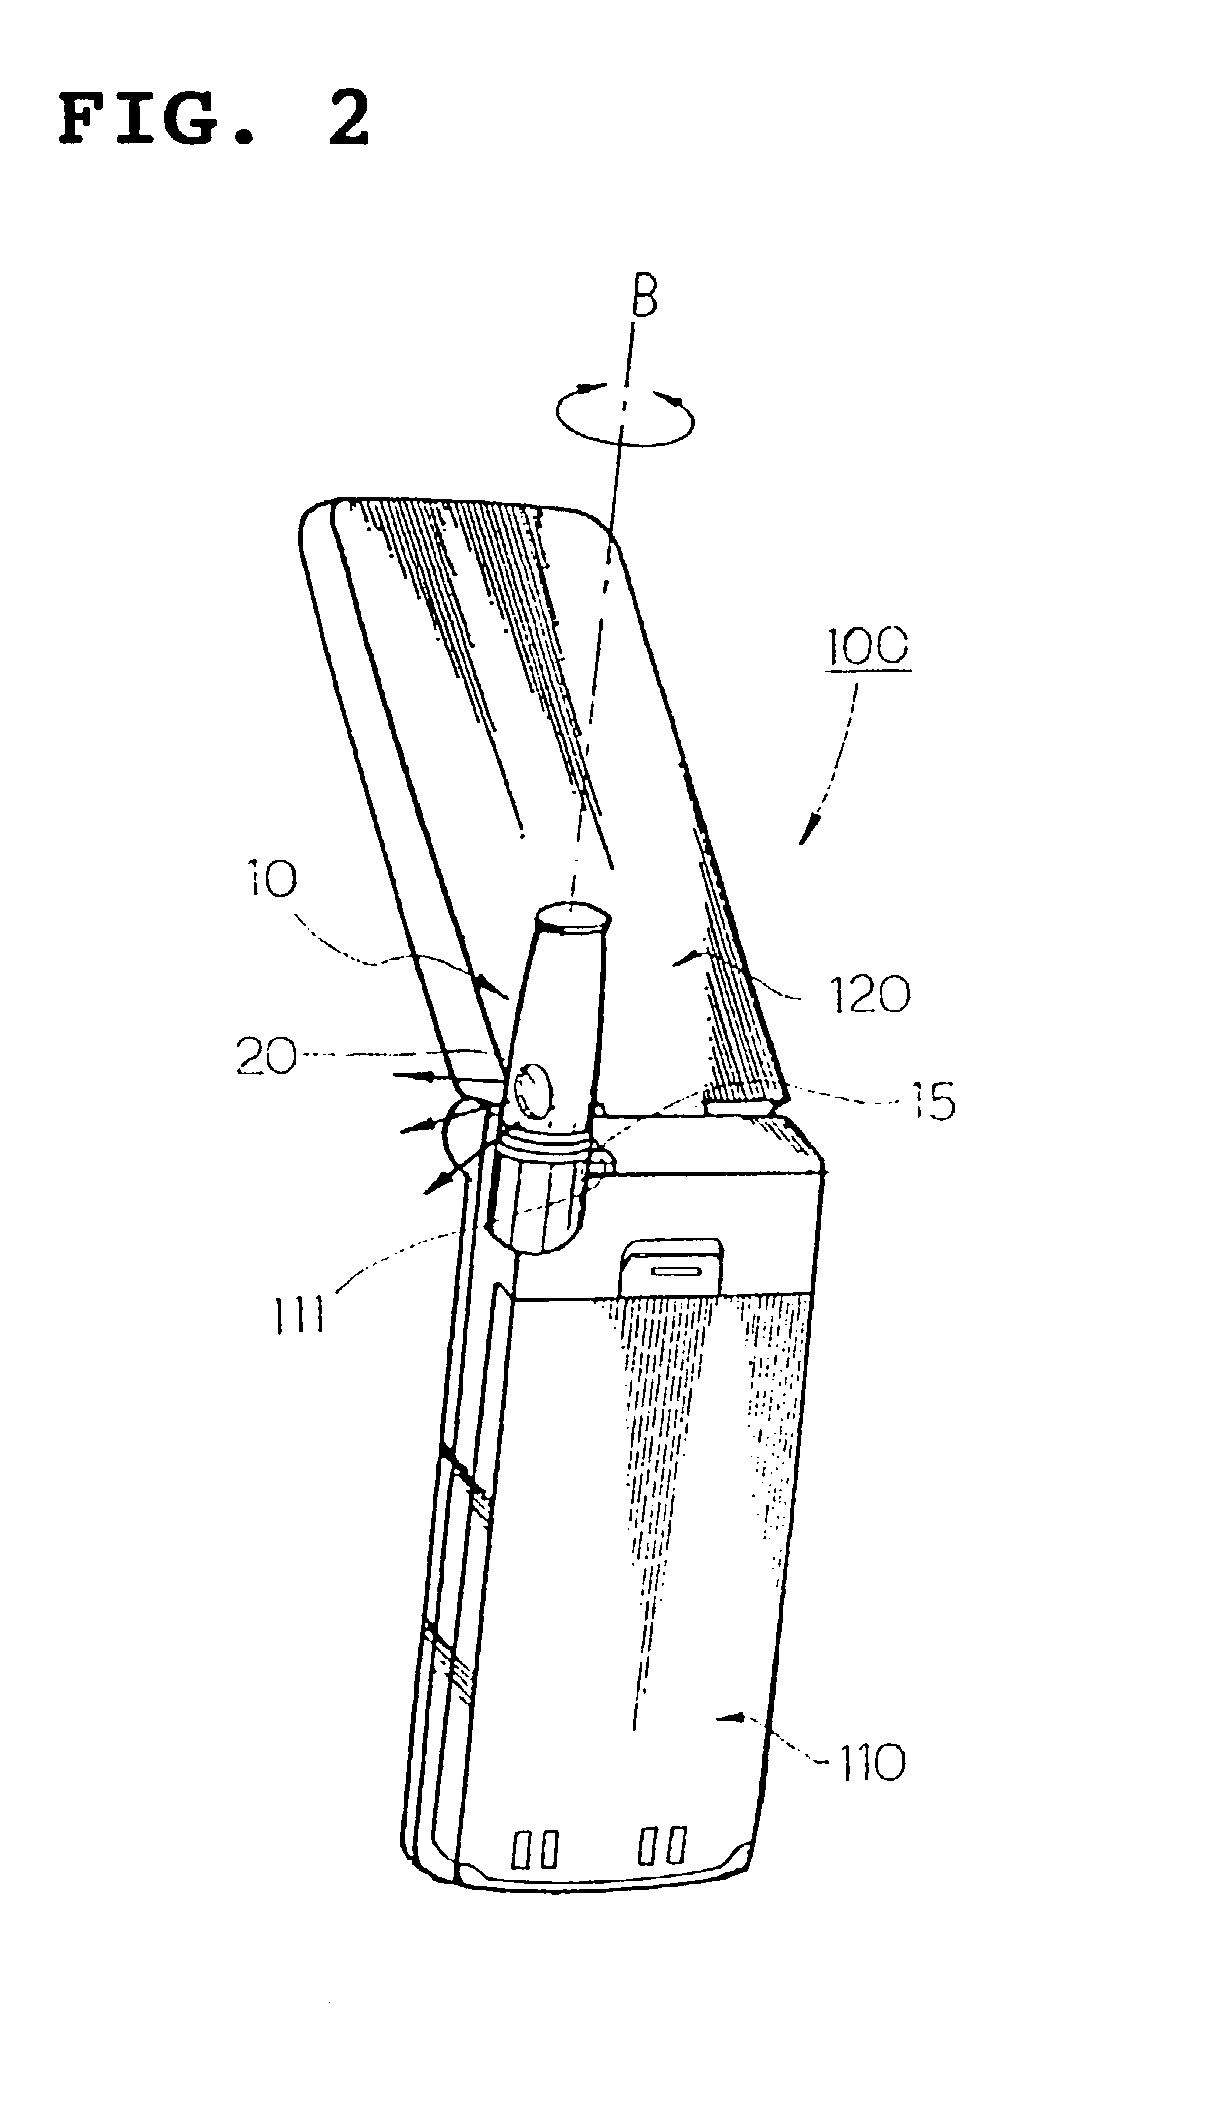 Antenna with camera lens assembly for portable radiotelephone